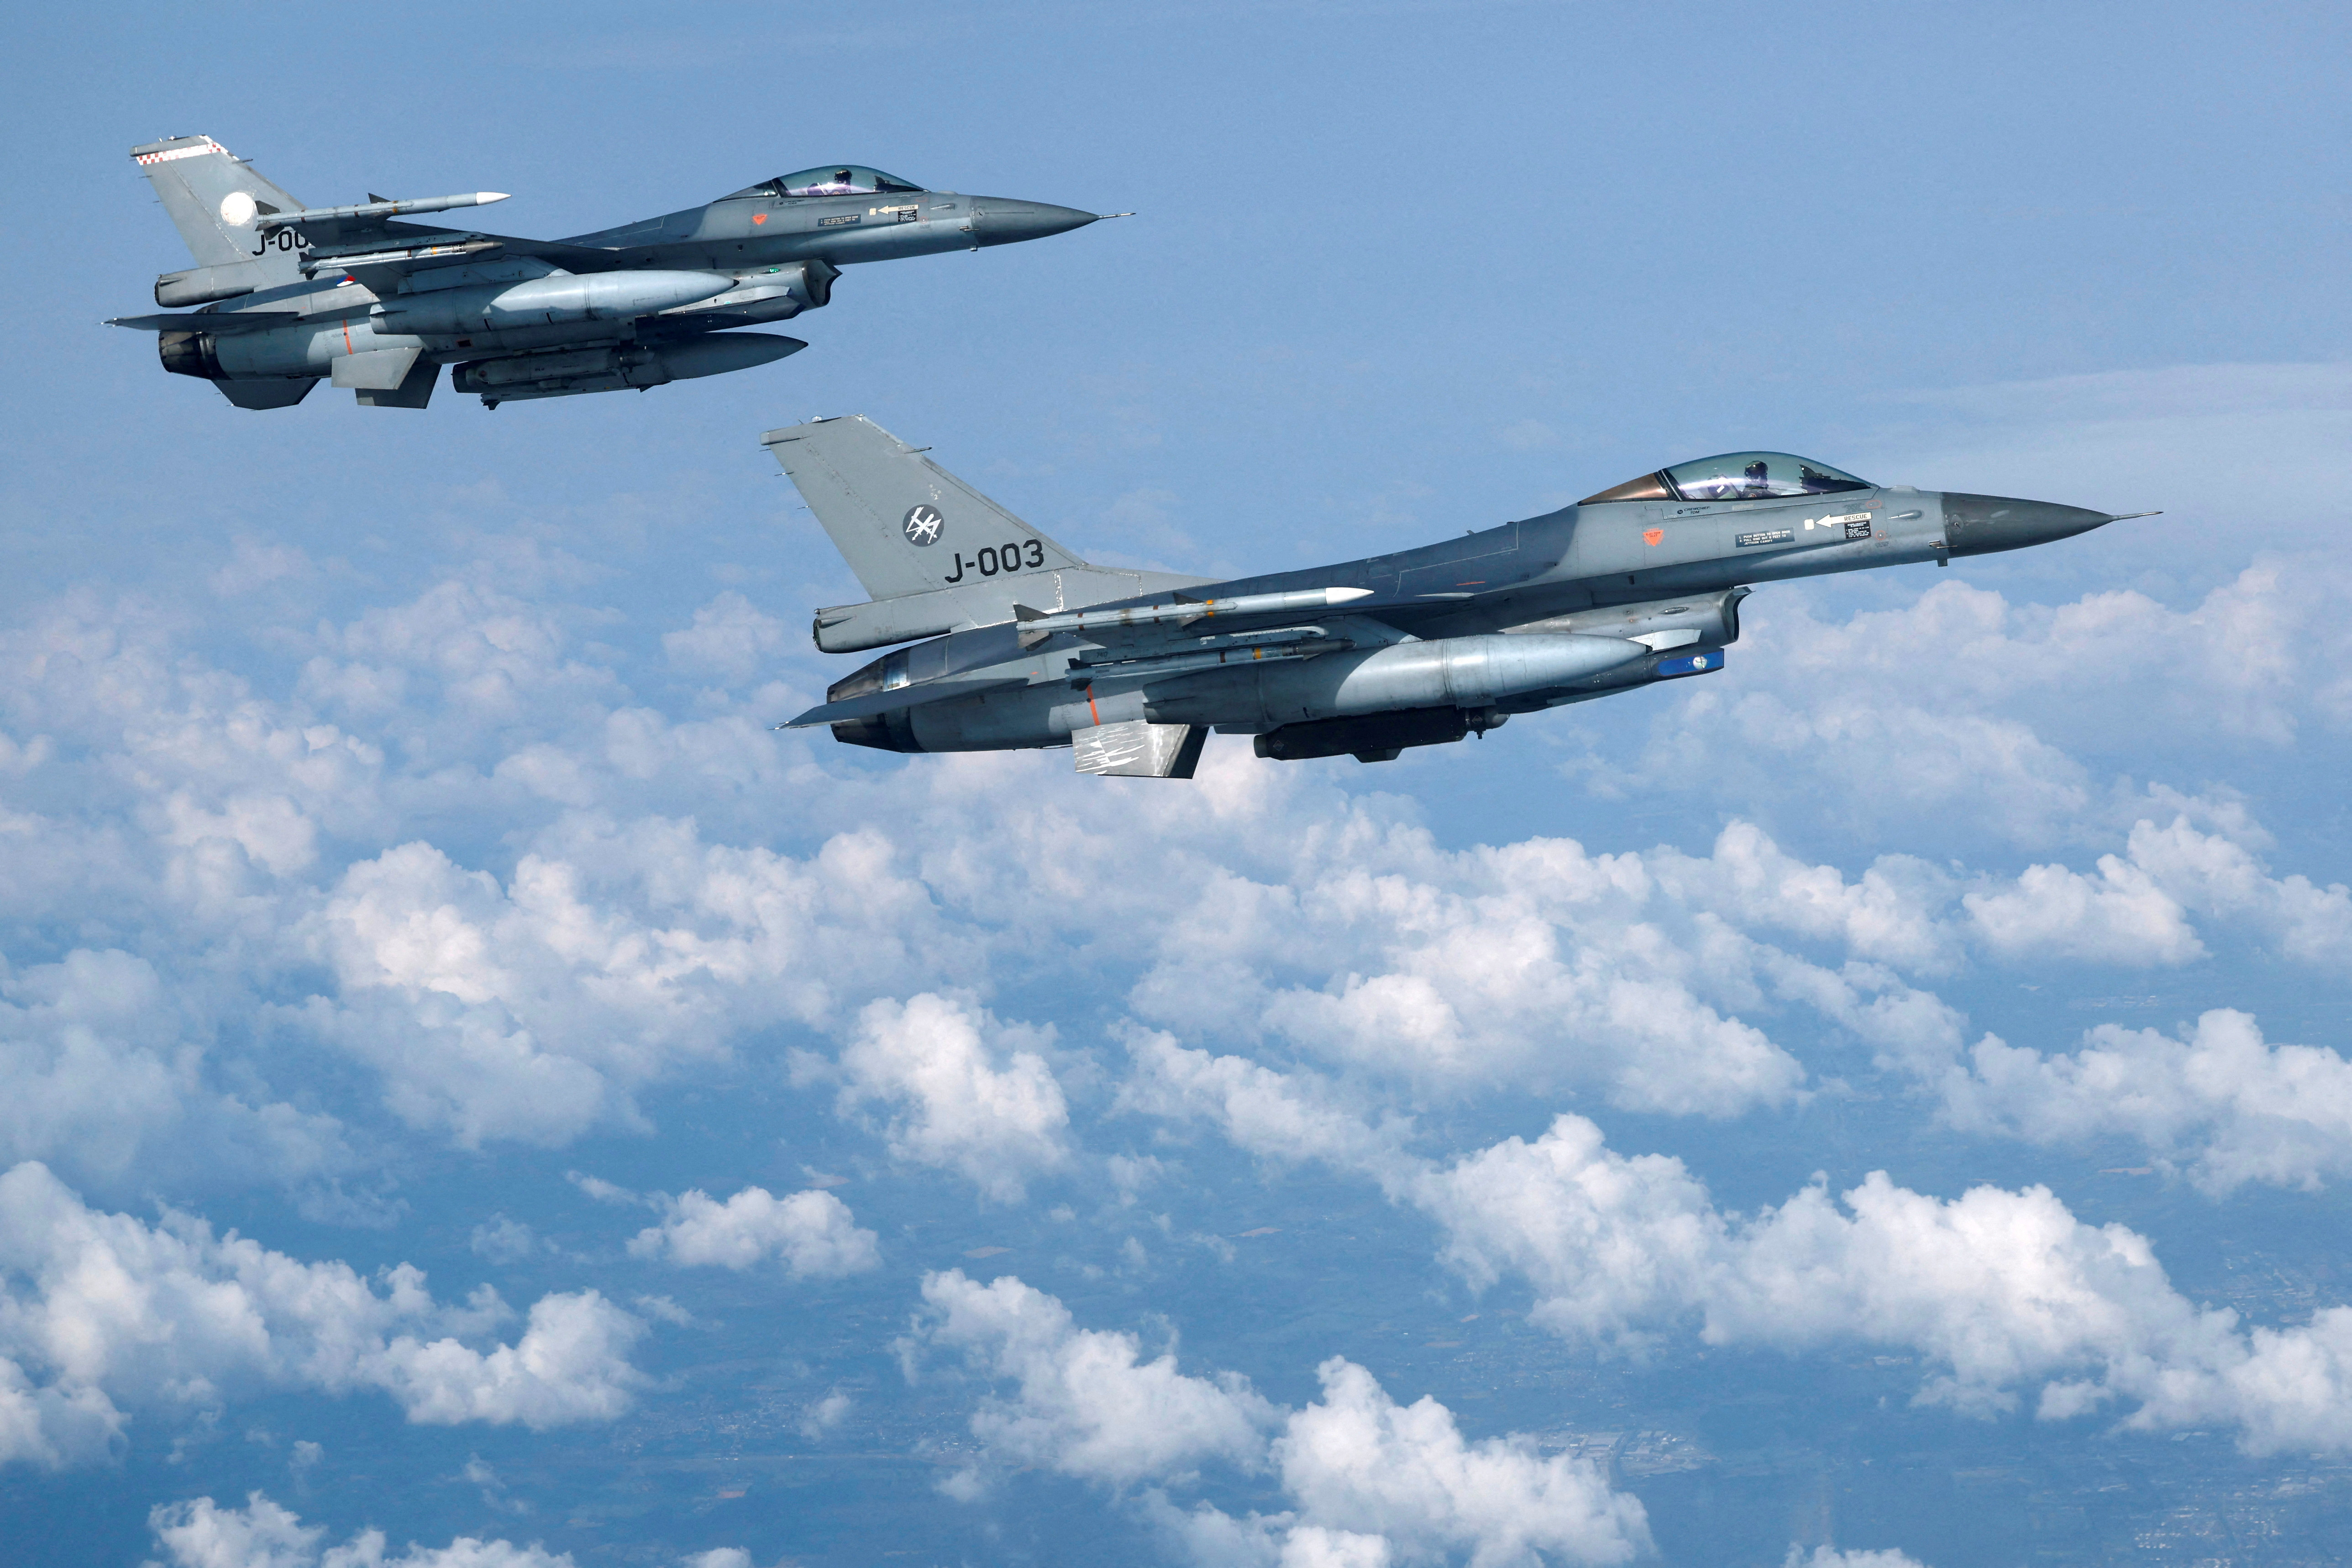 Netherlands' Air Force F-16 fighter jets fly during a media day